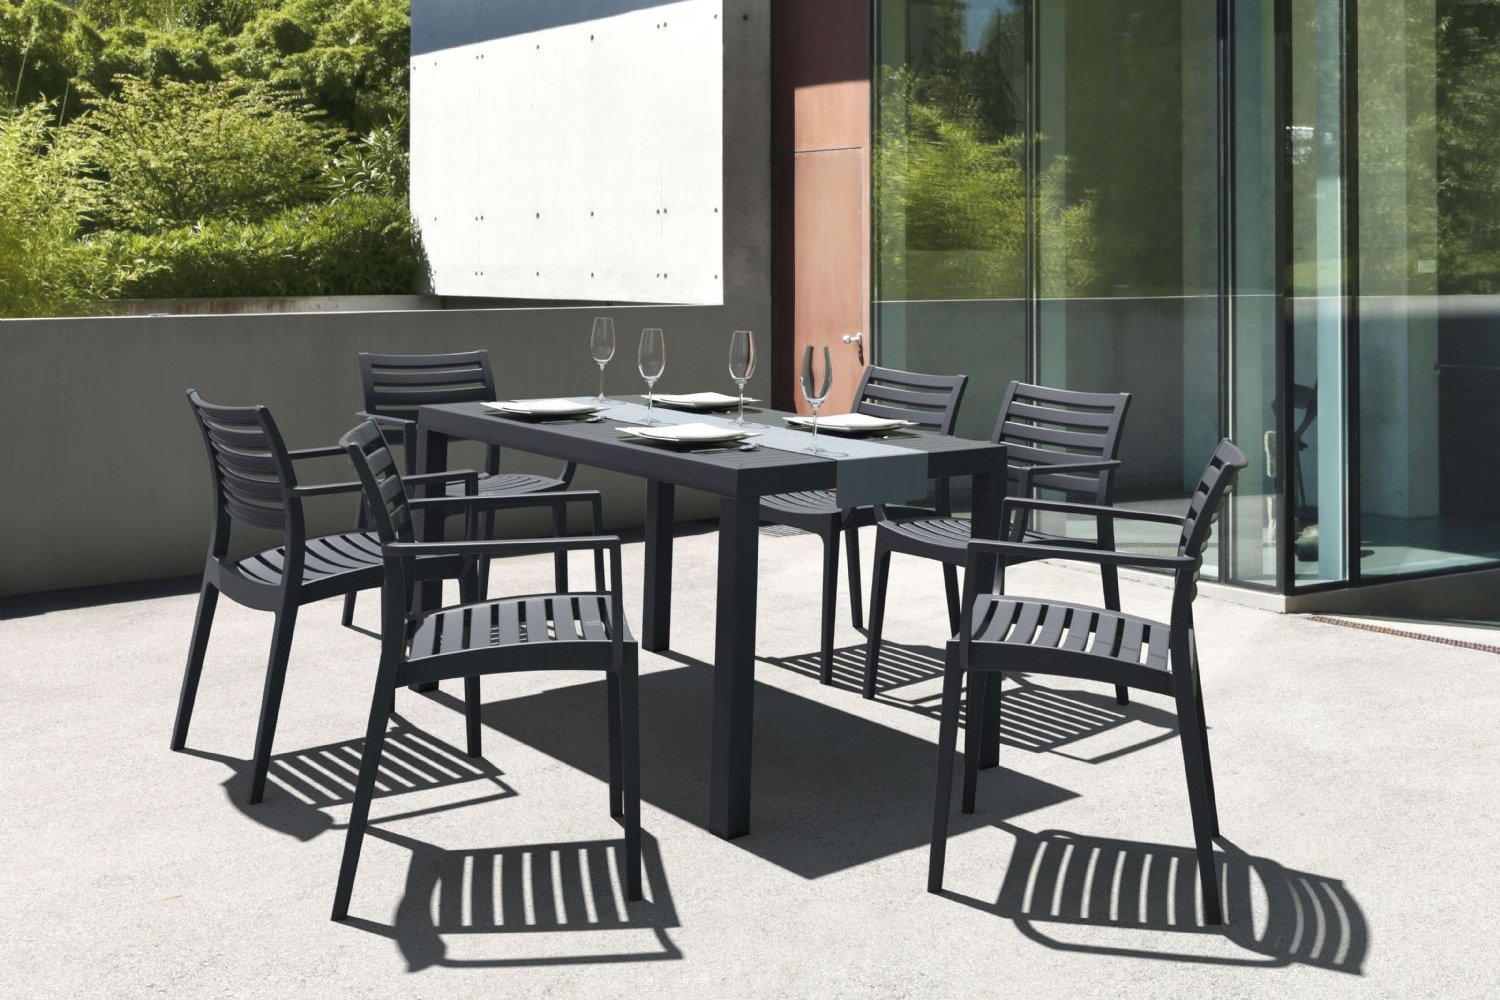 Artemis Resin Rectangle Outdoor Dining Set 7 Piece with Arm Chairs Taupe ISP1862S-DVR - 5